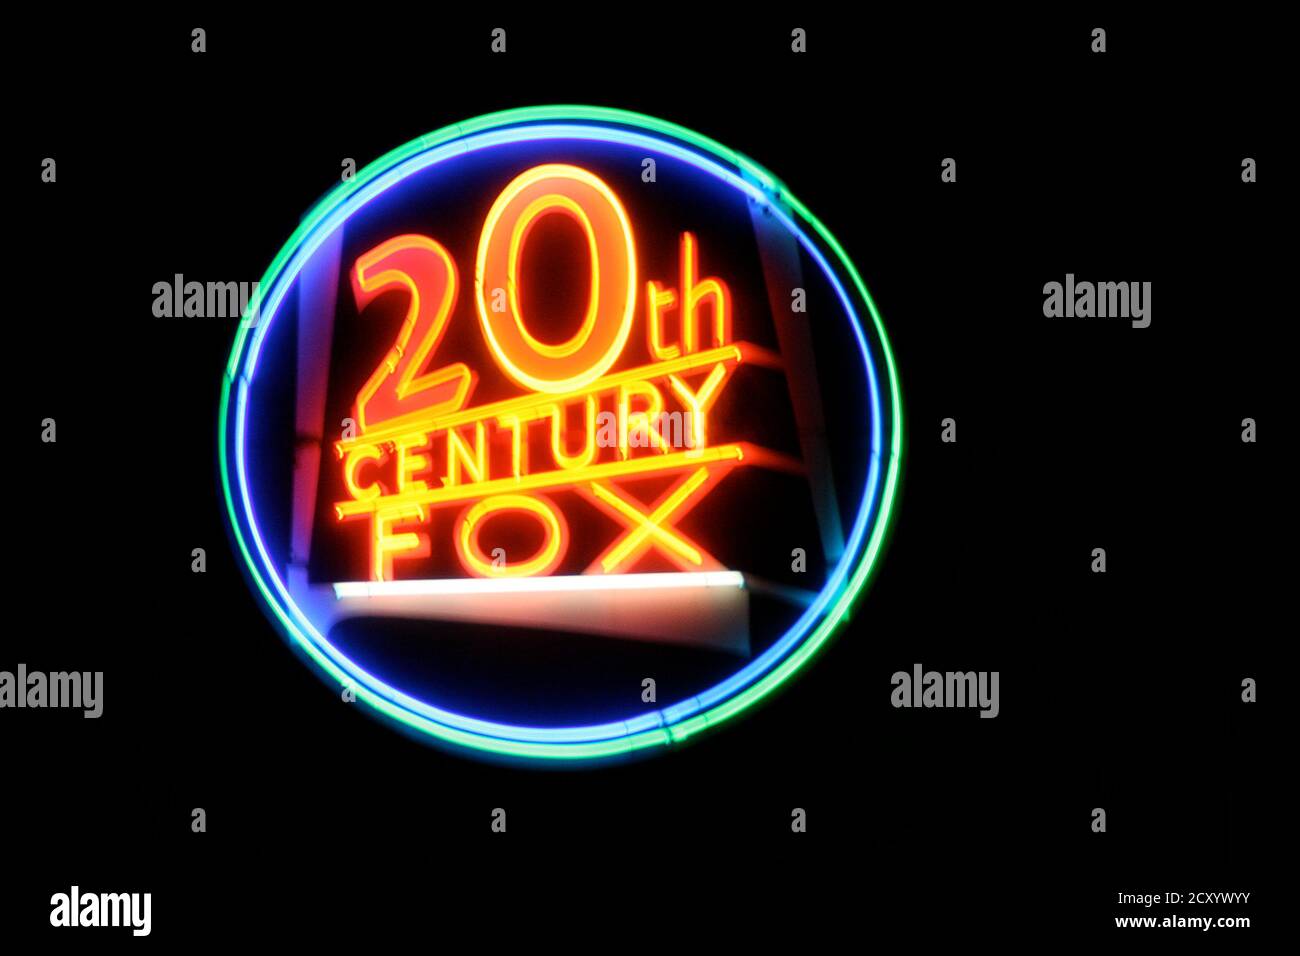 Close-up on a neon light shaped into the 20th Century Fox logo. Stock Photo